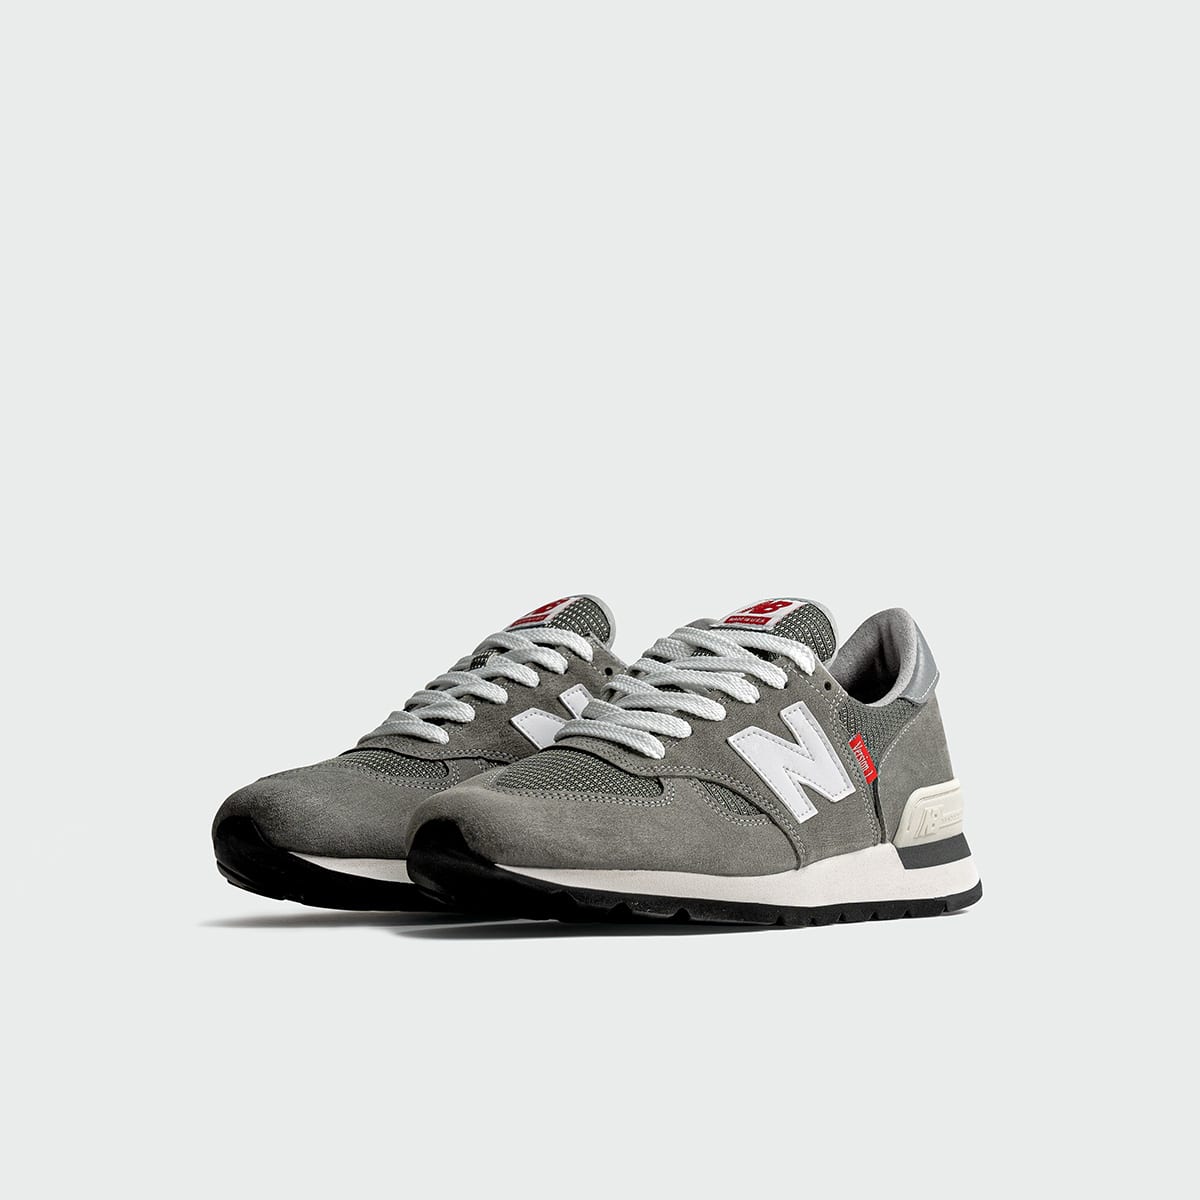 New Balance 990 V1 (Grey) | END. Launches